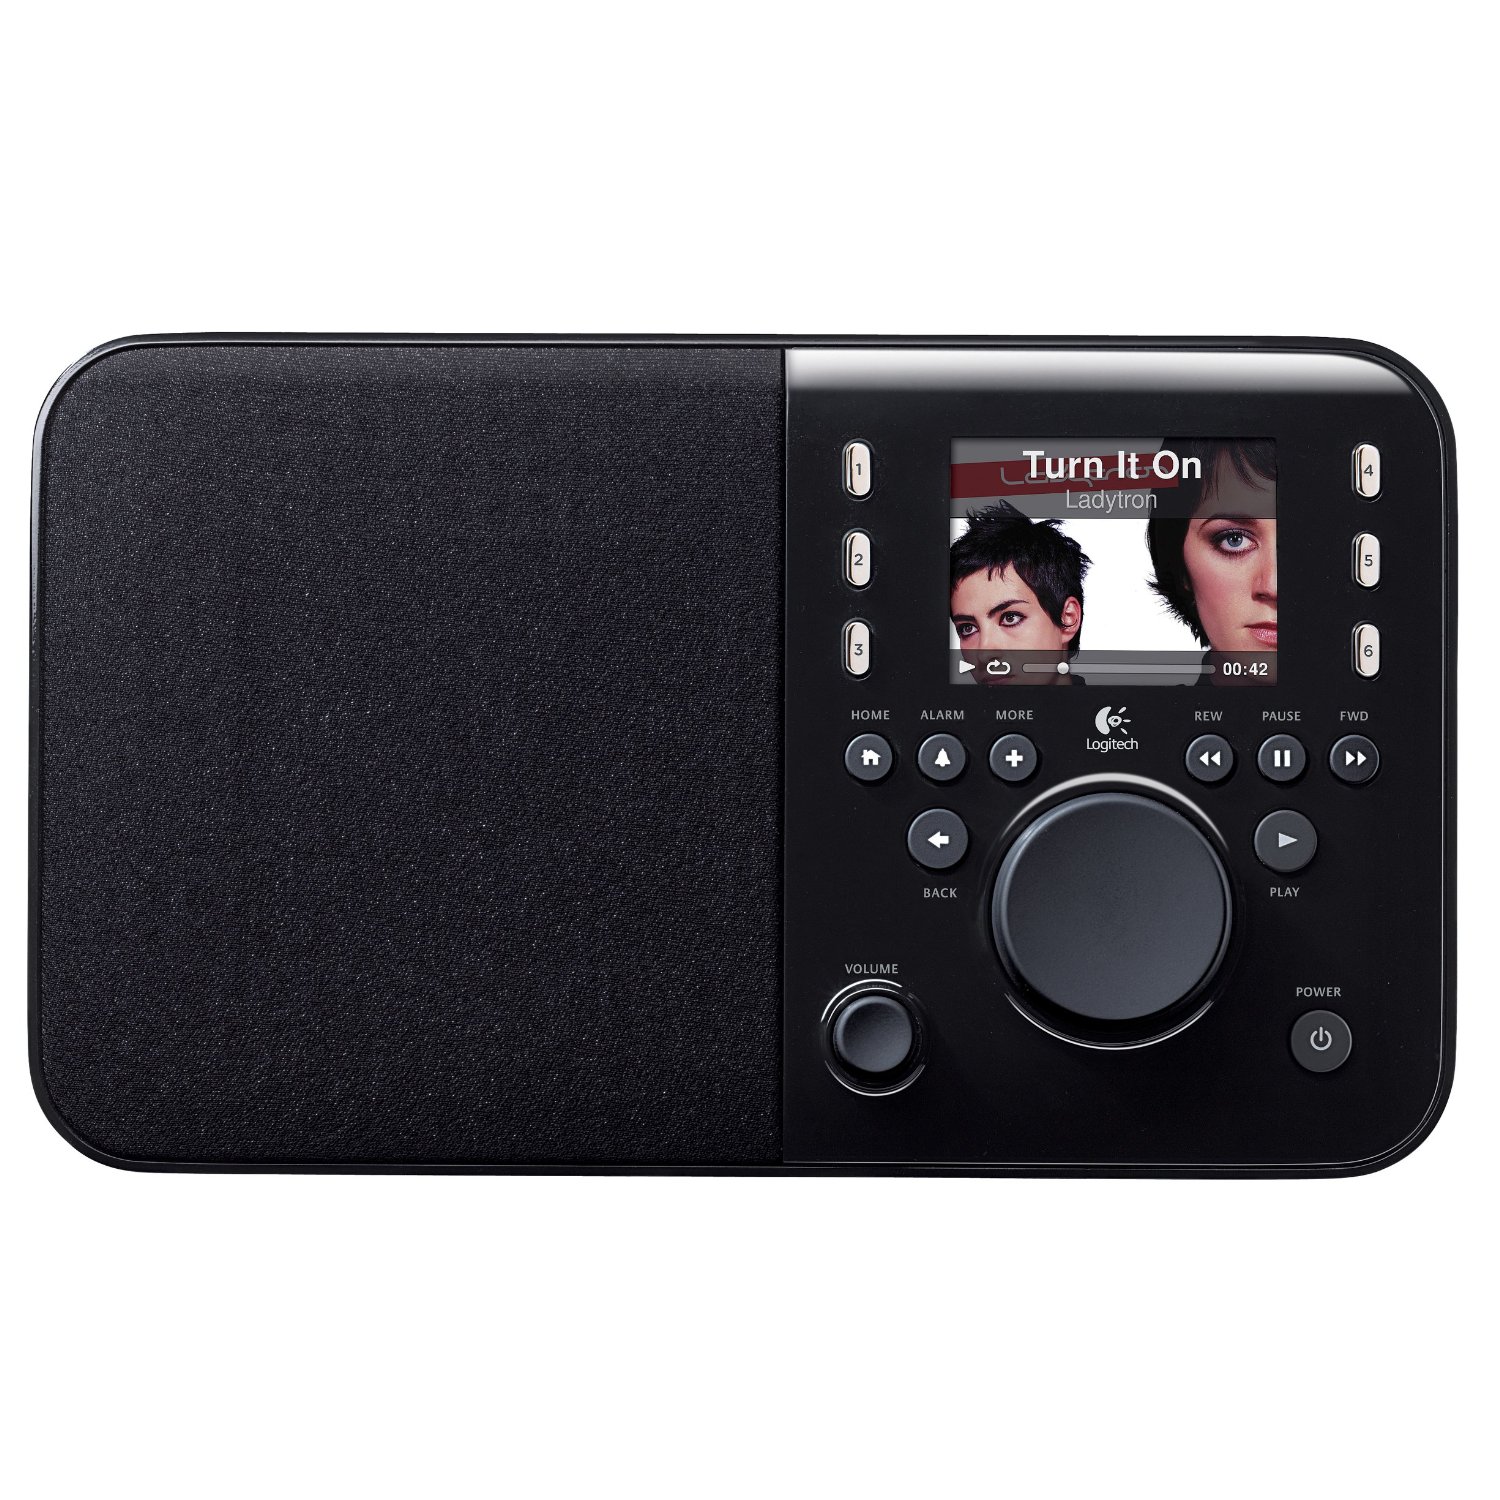 http://thetechjournal.com/wp-content/uploads/images/1108/1314346288-logitech-squeezebox-radio-music-player-with-color-screen-1.jpg